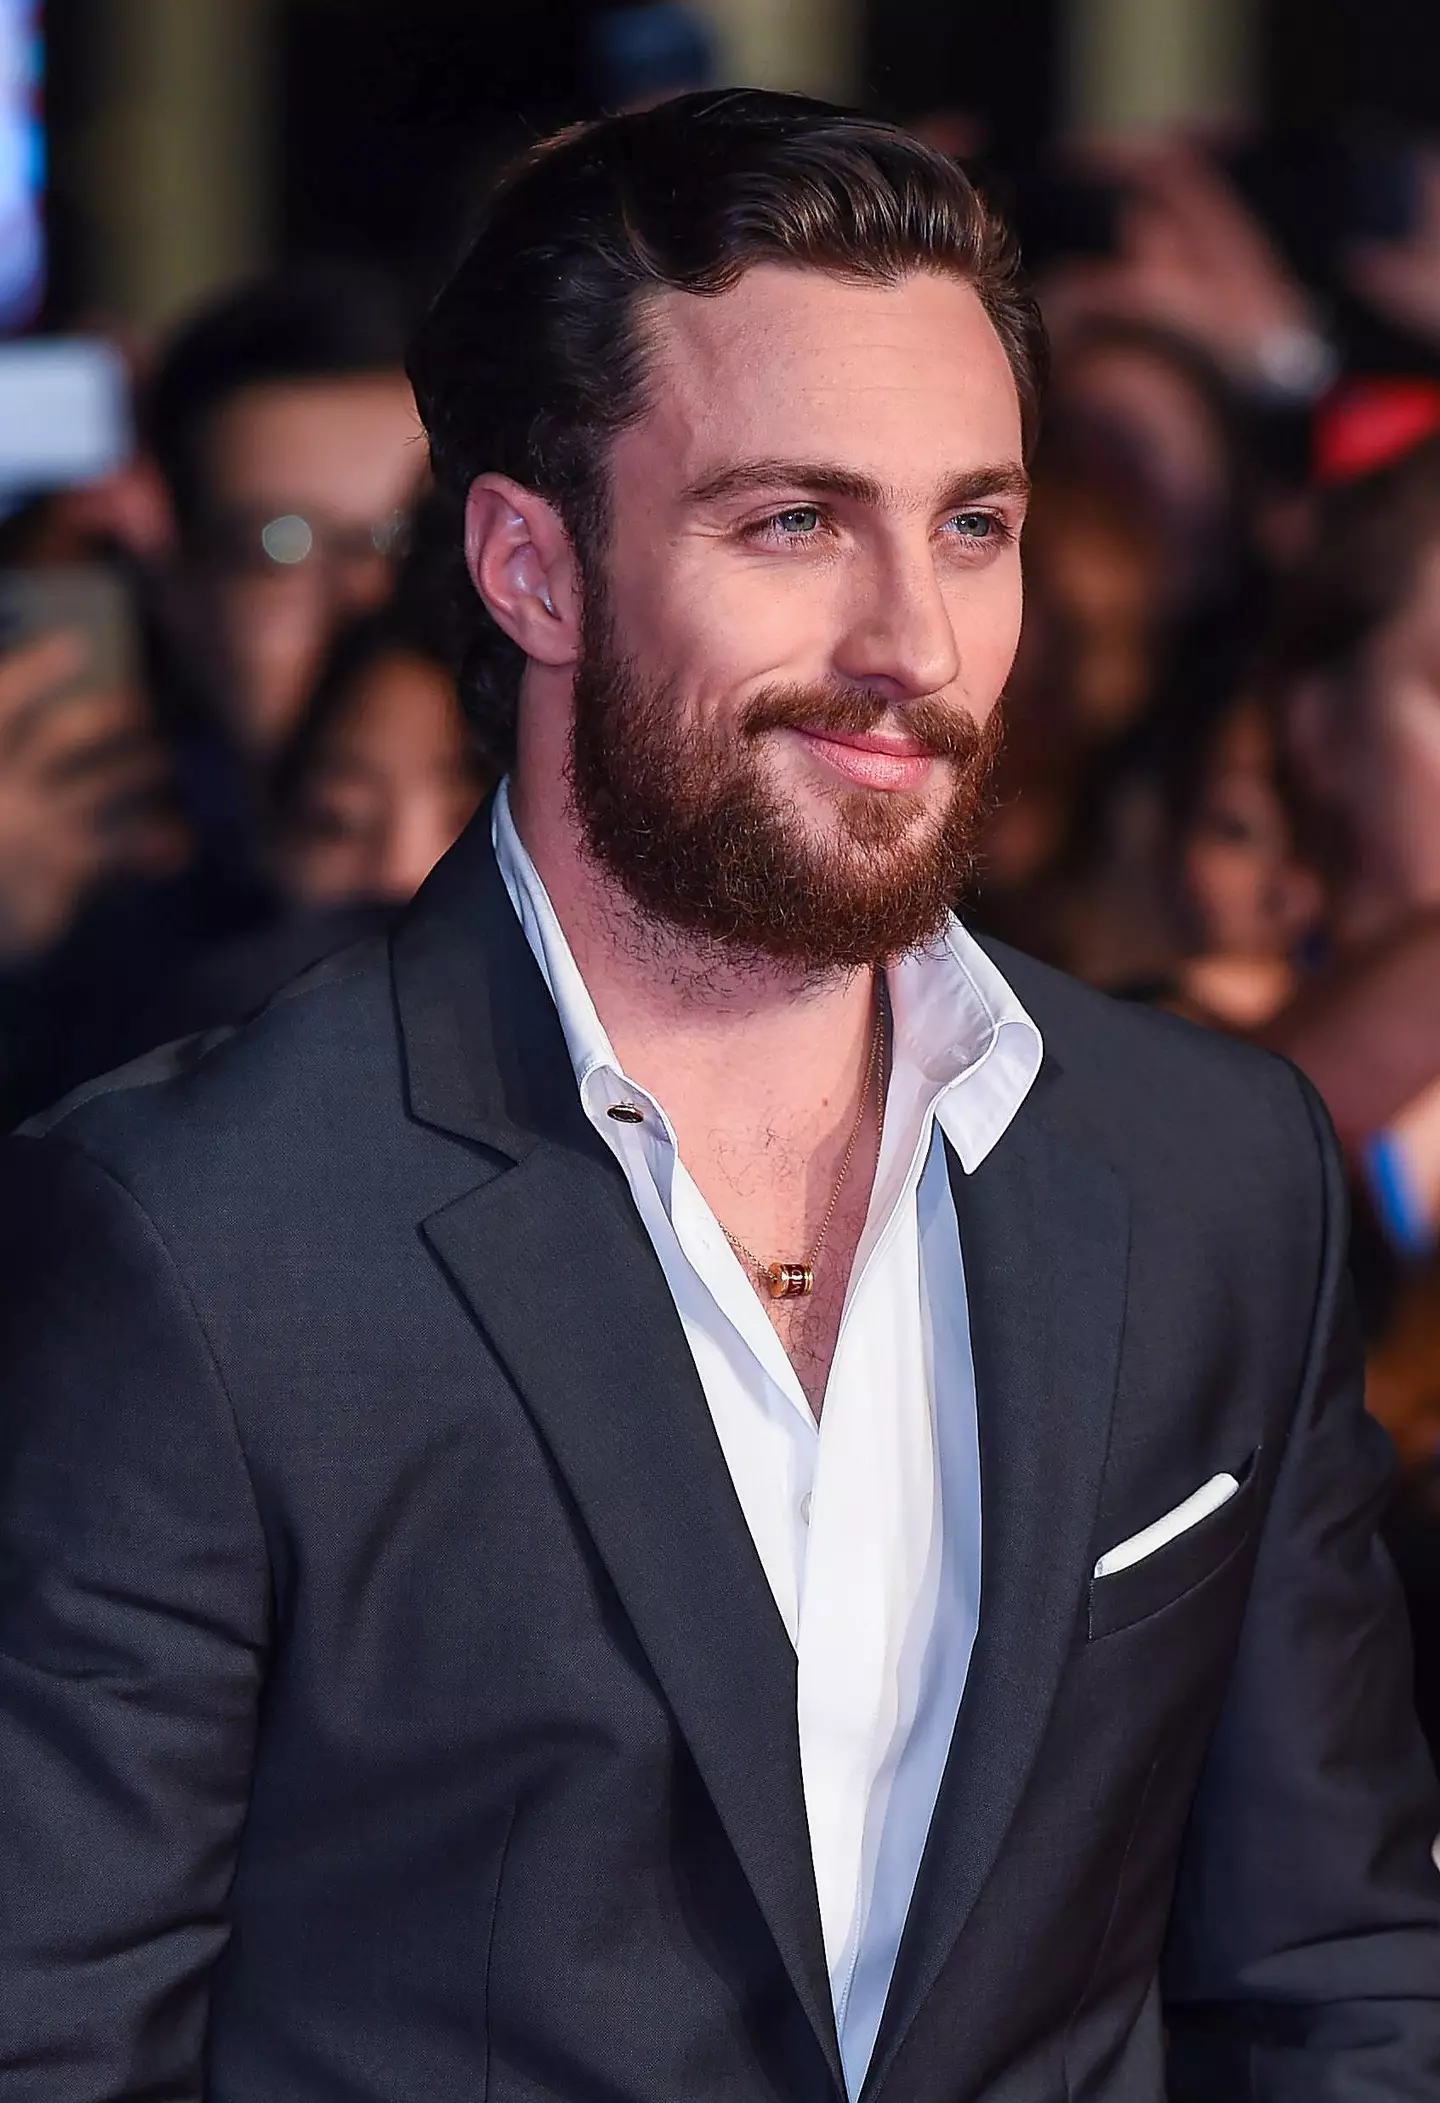 Following an allegedly filmed opening sequence, Aaron Taylor-Johnson is emerging as the new favourite.